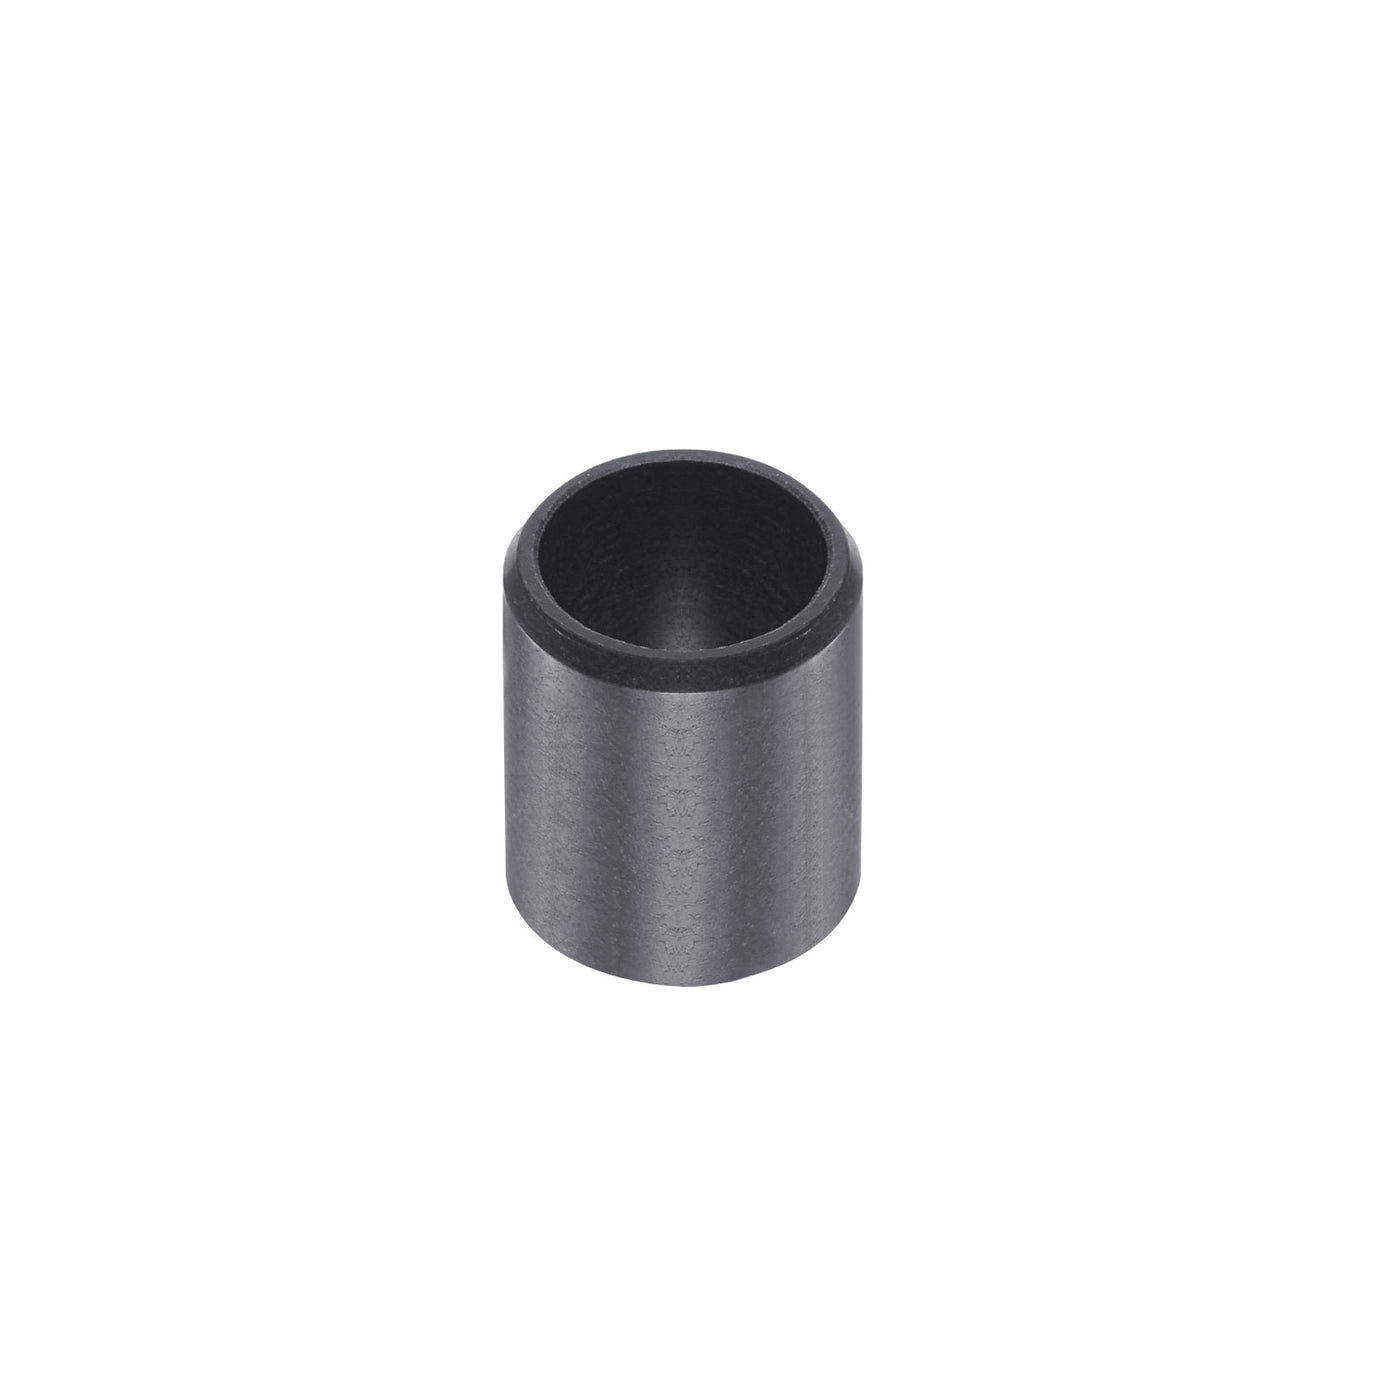 uxcell Uxcell Sleeve Bearings 8mmx10mmx15mm POM Wrapped Oilless Bushings Black